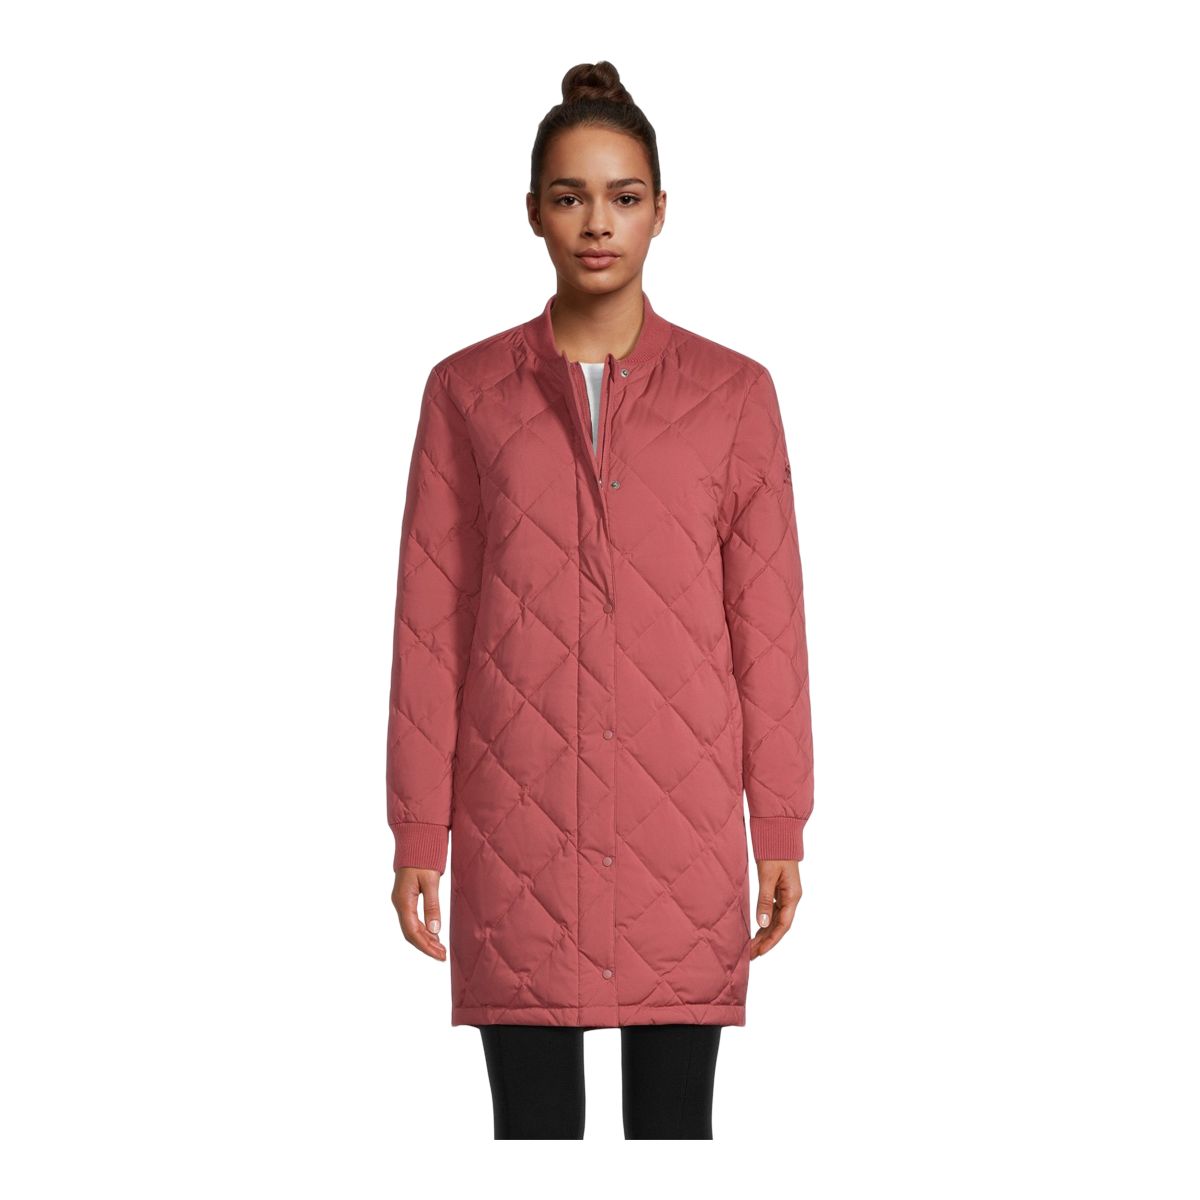 Woods Women's Bering Quilted Insulated Jacket